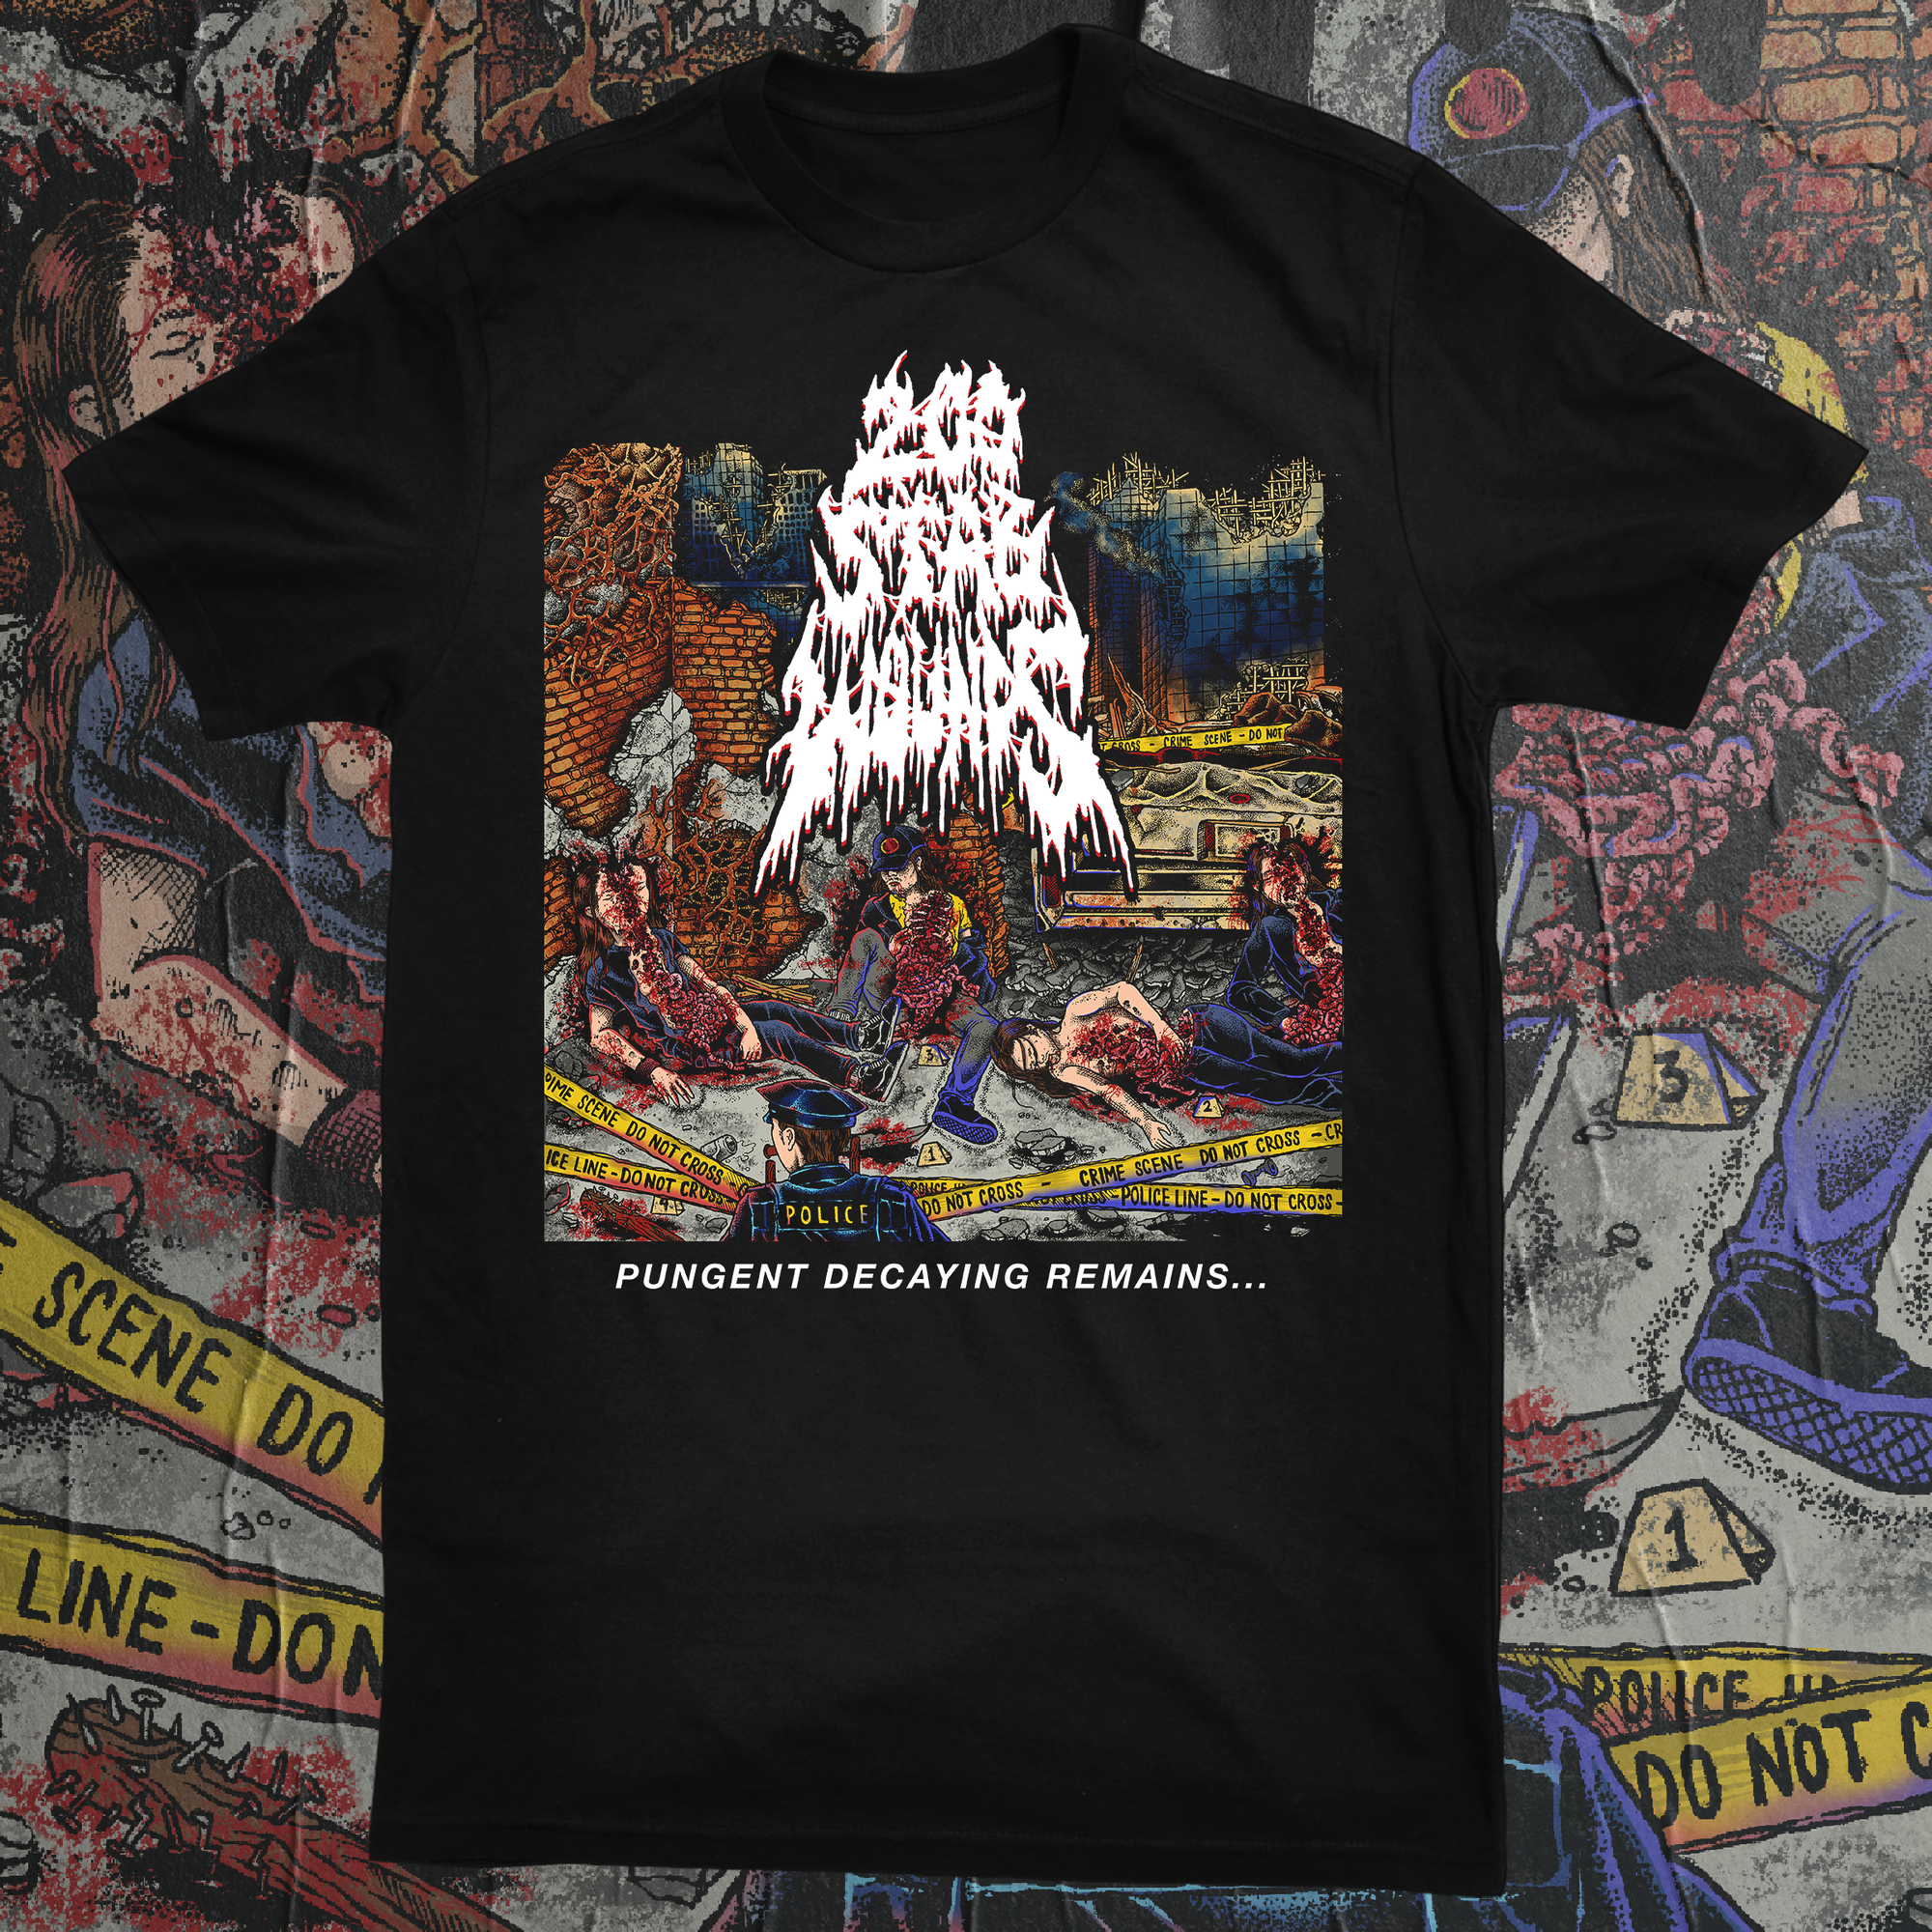 200 STAB WOUNDS "PUNGENT DECAYING REMAINS" SHIRT (PRE-ORDER)